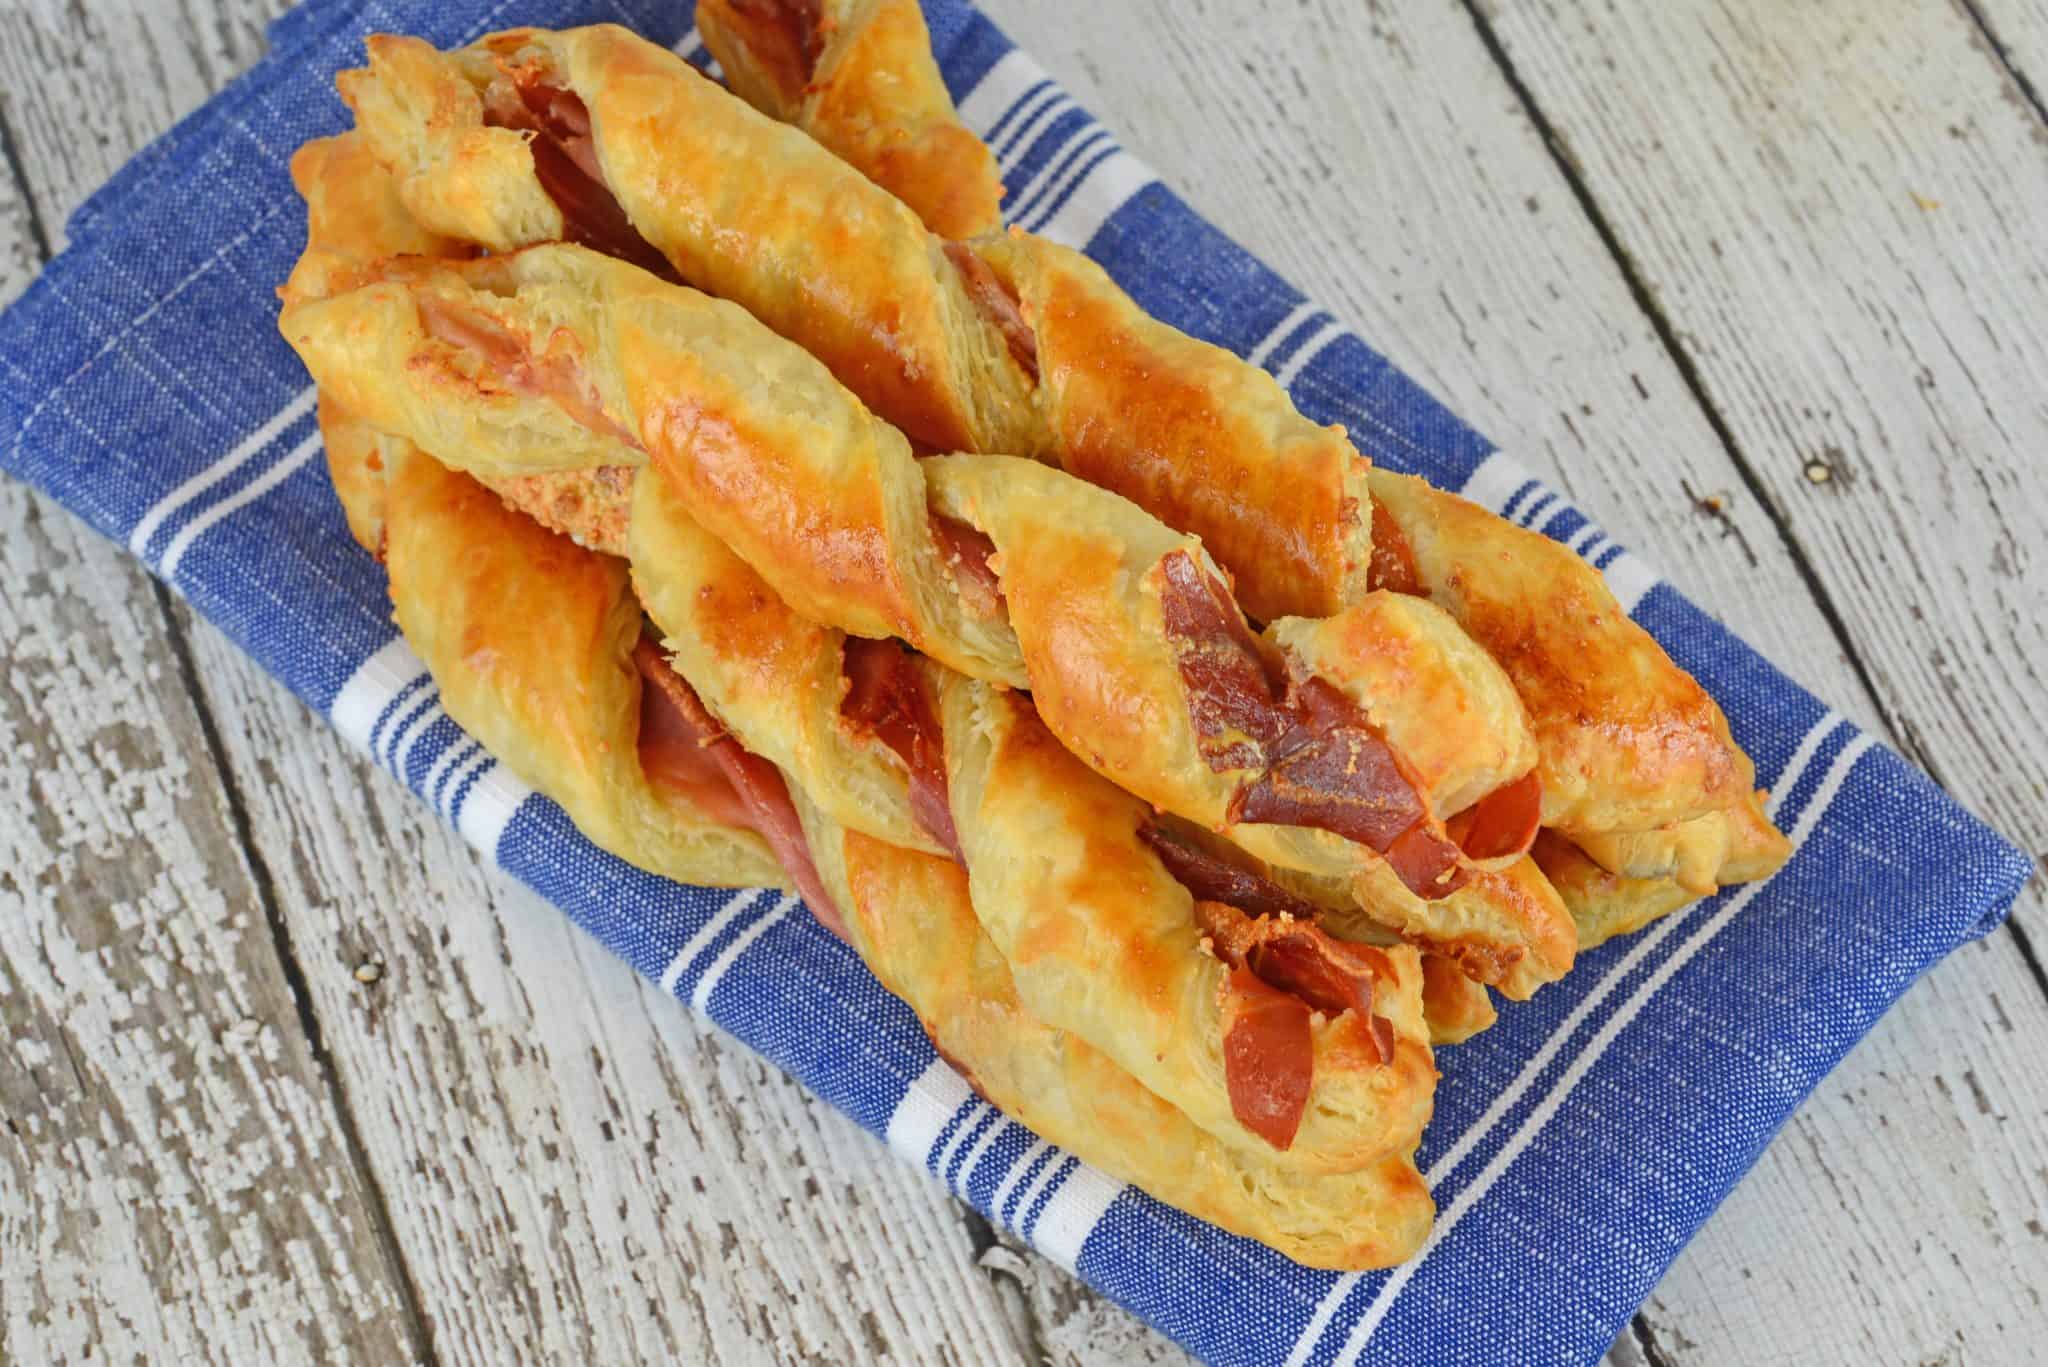 Prosciutto Parmesan Cheese Straws are made with just a few ingredients and 10 minutes in the oven! An easy appetizer for all occasions. #cheesestraws #puffpastrybreadsticks www.savoryexperiments.com